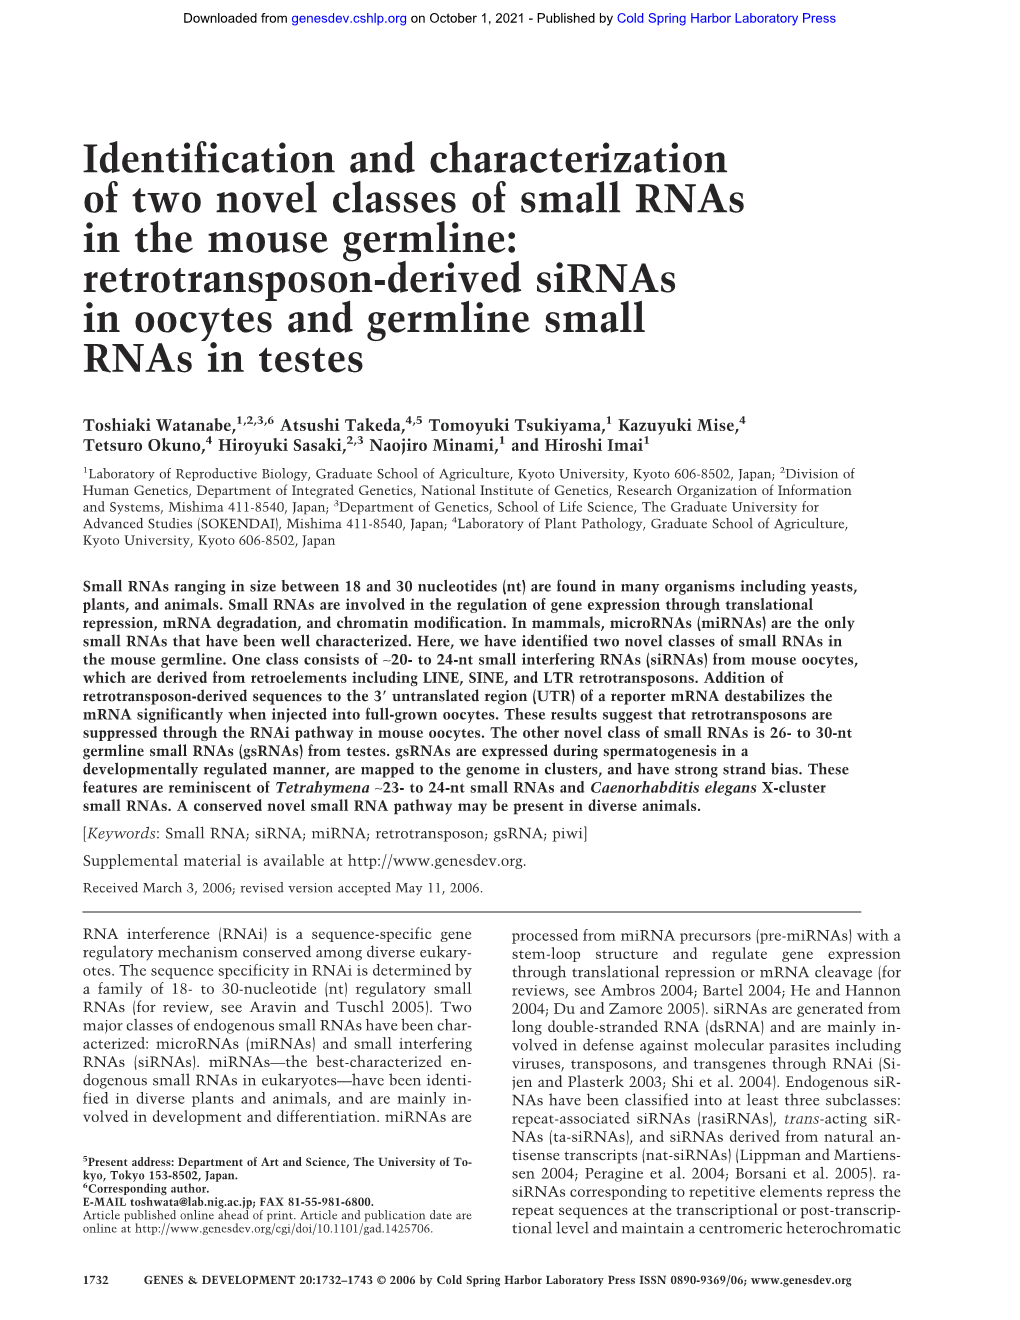 Retrotransposon-Derived Sirnas in Oocytes and Germline Small Rnas in Testes